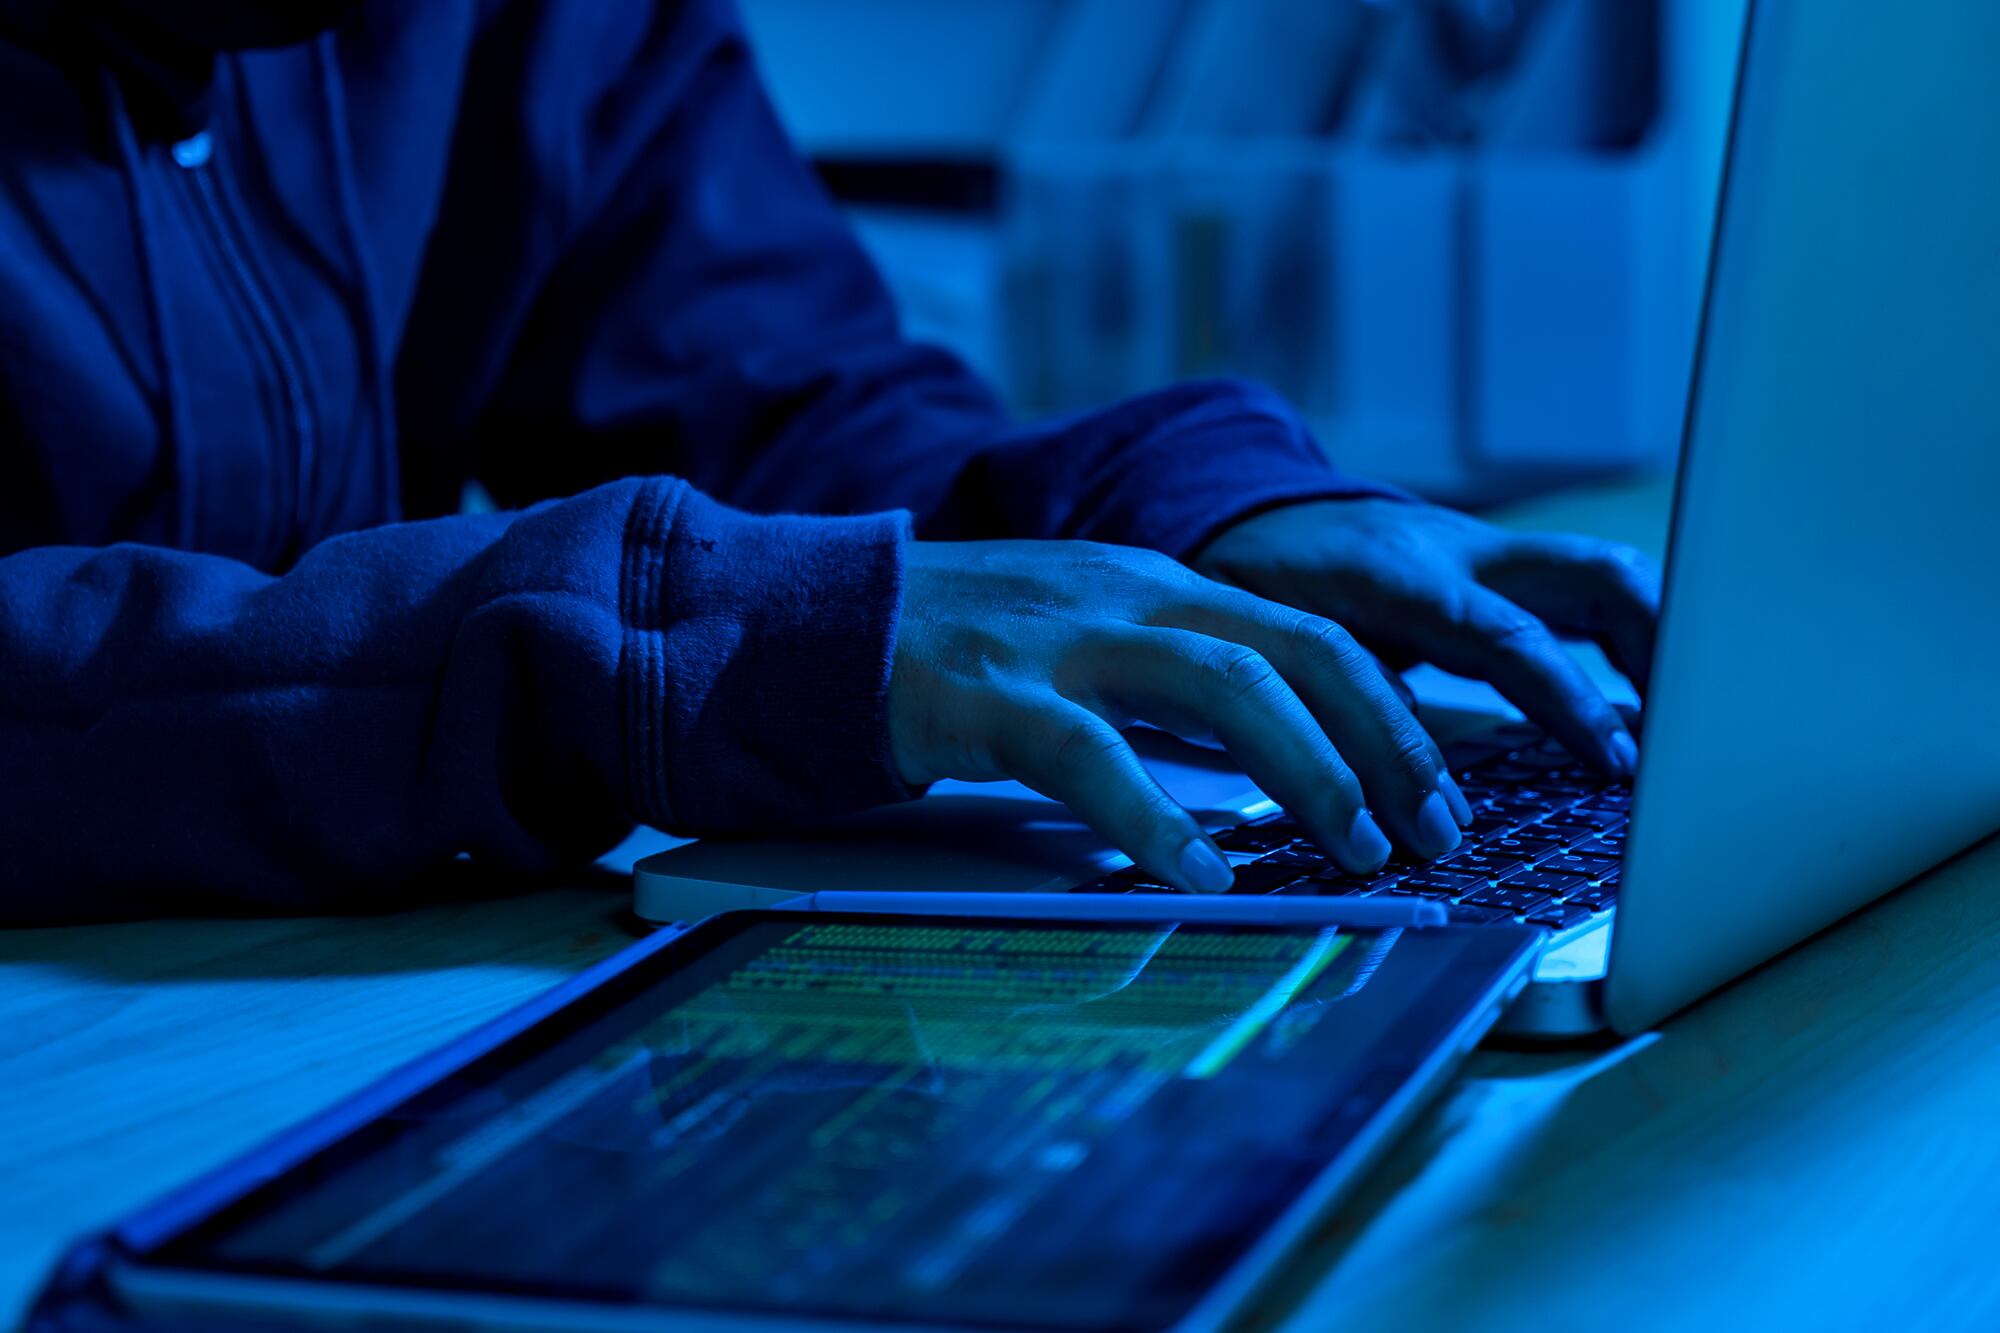 With blue light cast on the photo, a pair of hands type on a laptop. A tablet is seen in the foreground.